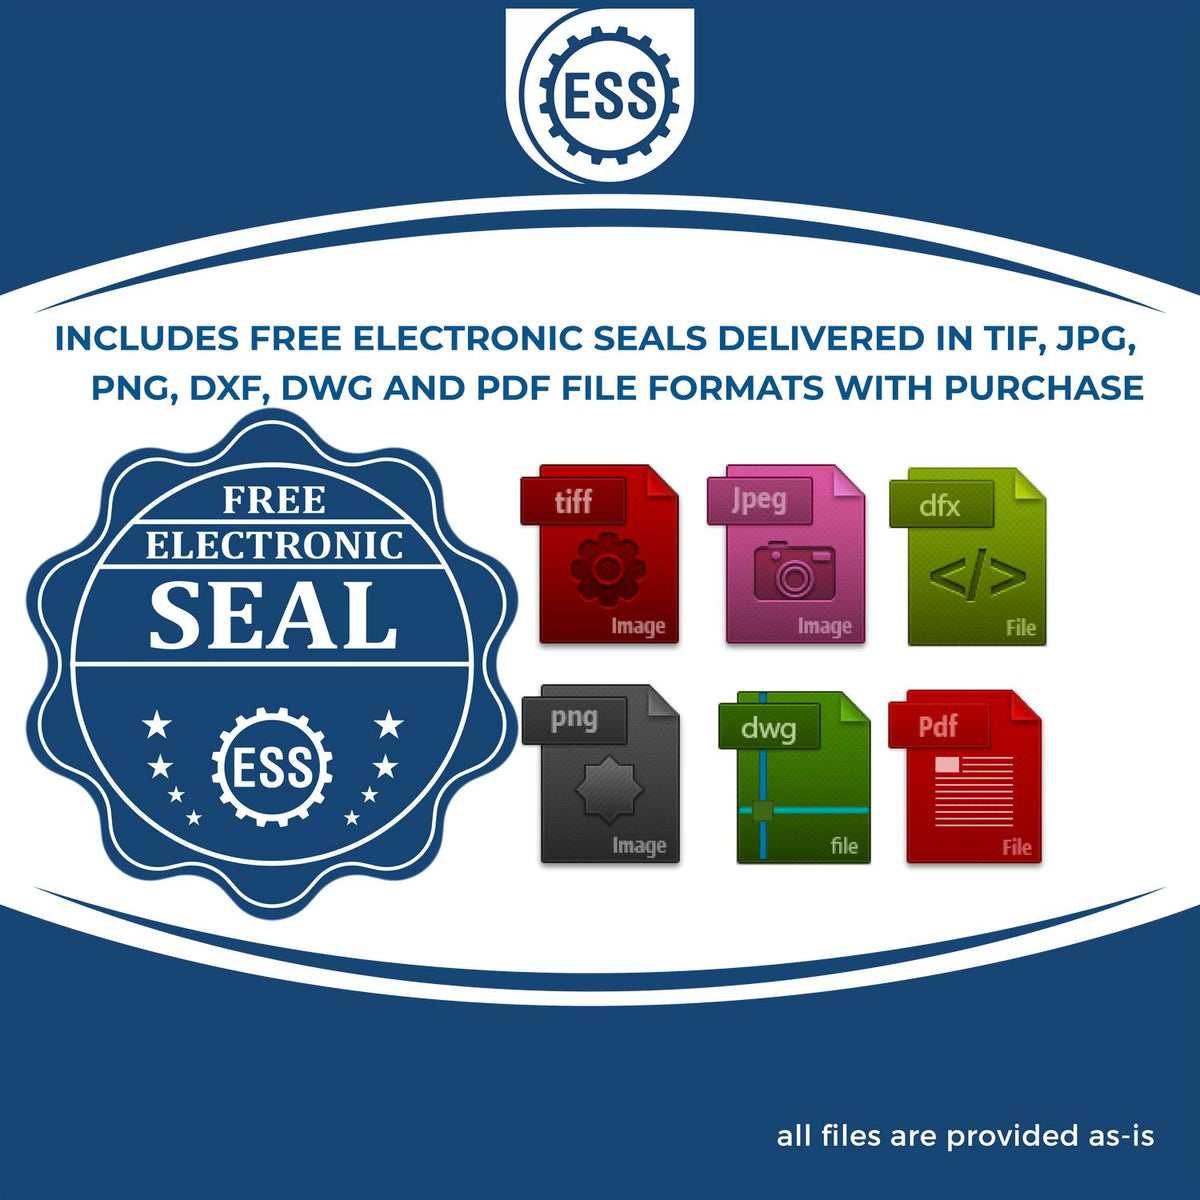 An infographic for the free electronic seal for the Idaho Engineer Desk Seal illustrating the different file type icons such as DXF, DWG, TIF, JPG and PNG.